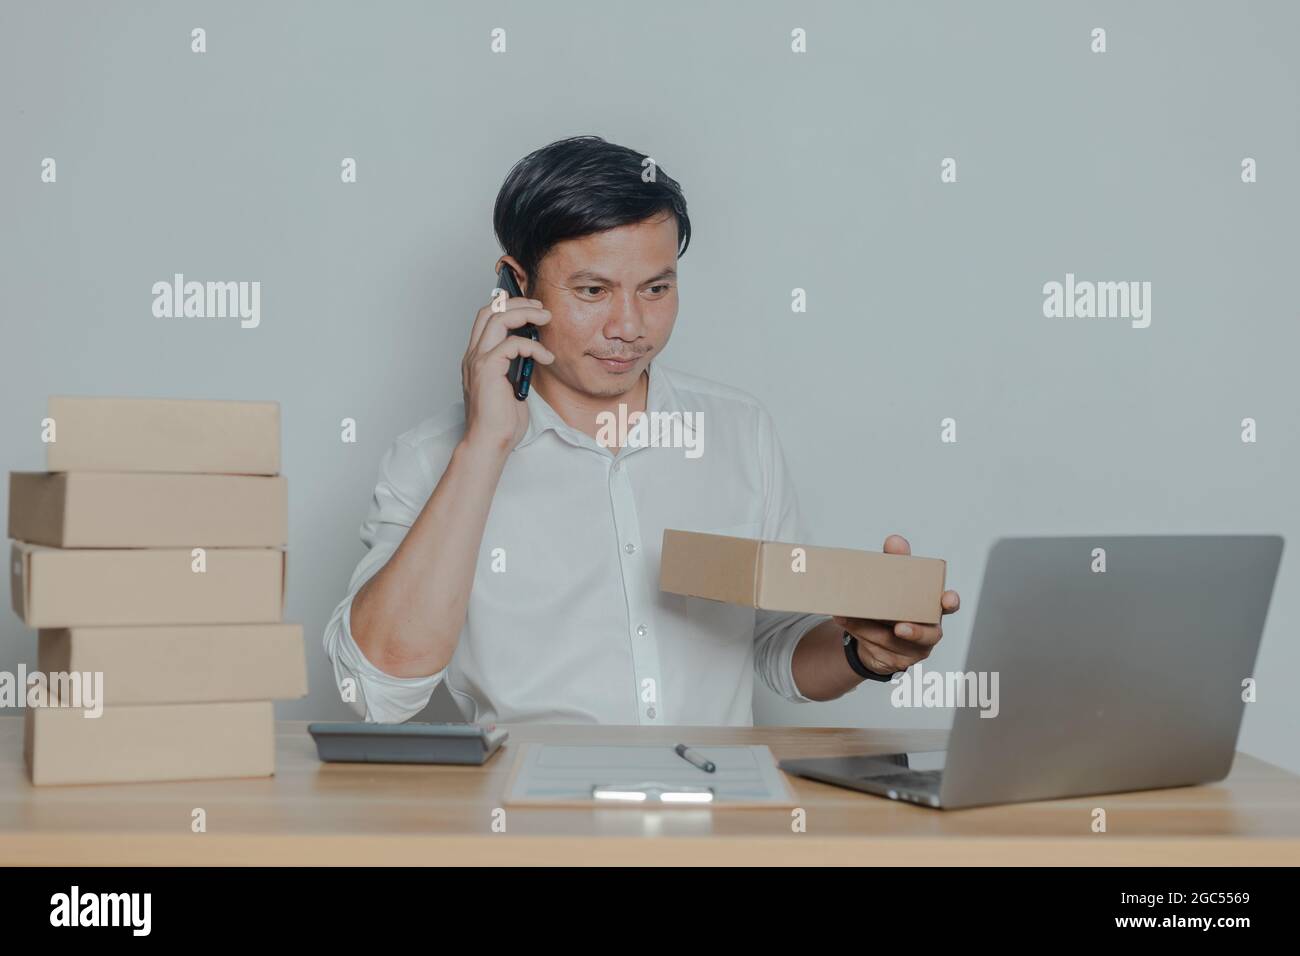 Man selling online at home small business ideas Stock Photo